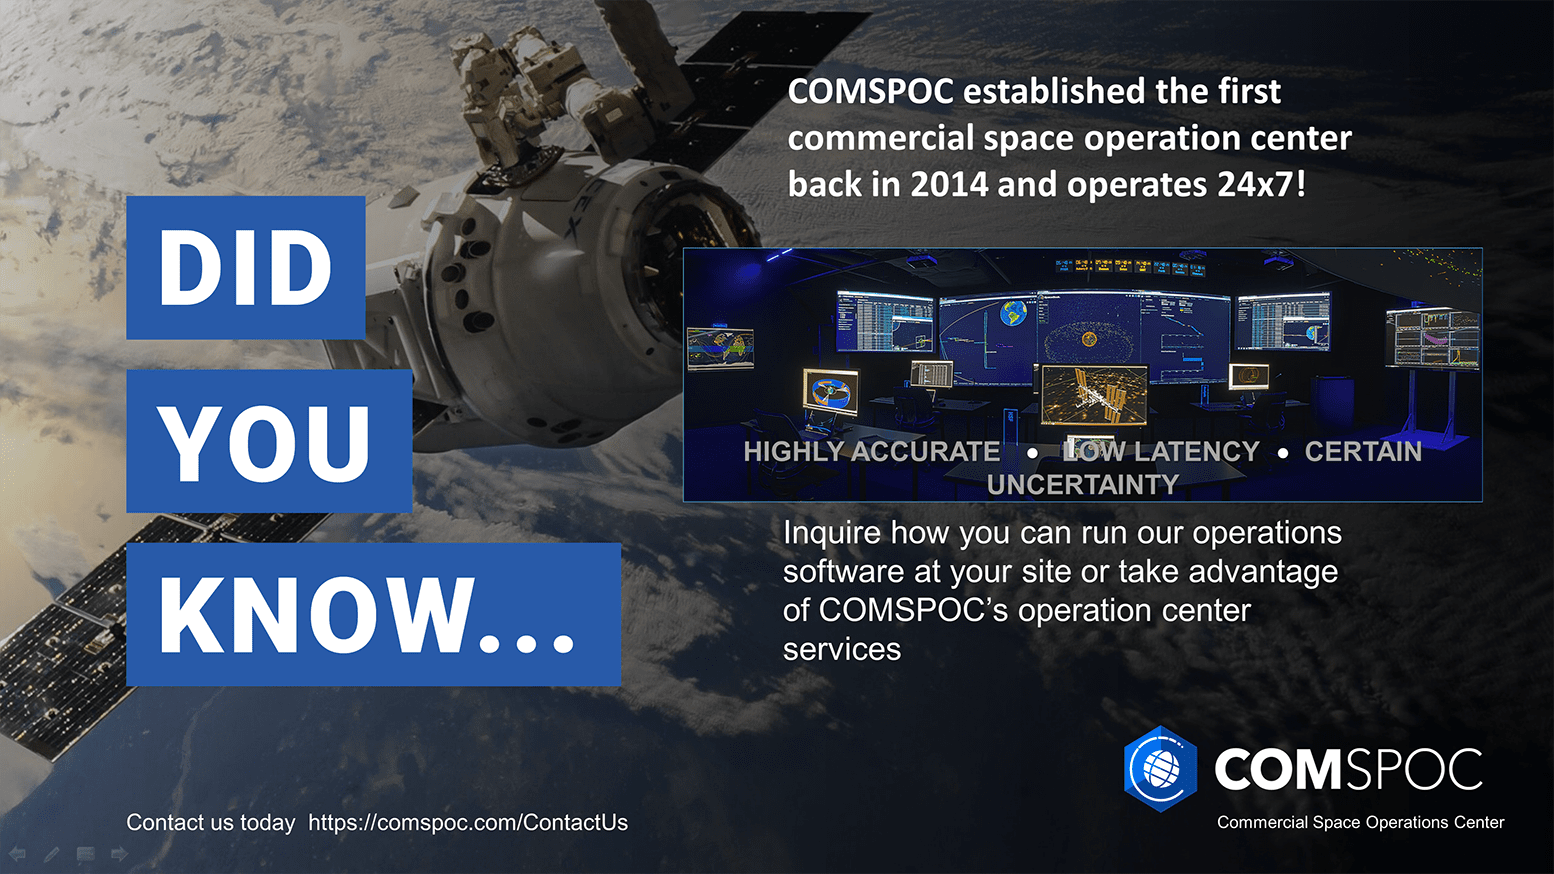 Did You Know: COMSPOC established the first commercial space operation center back in 2014 and operates 24x7!